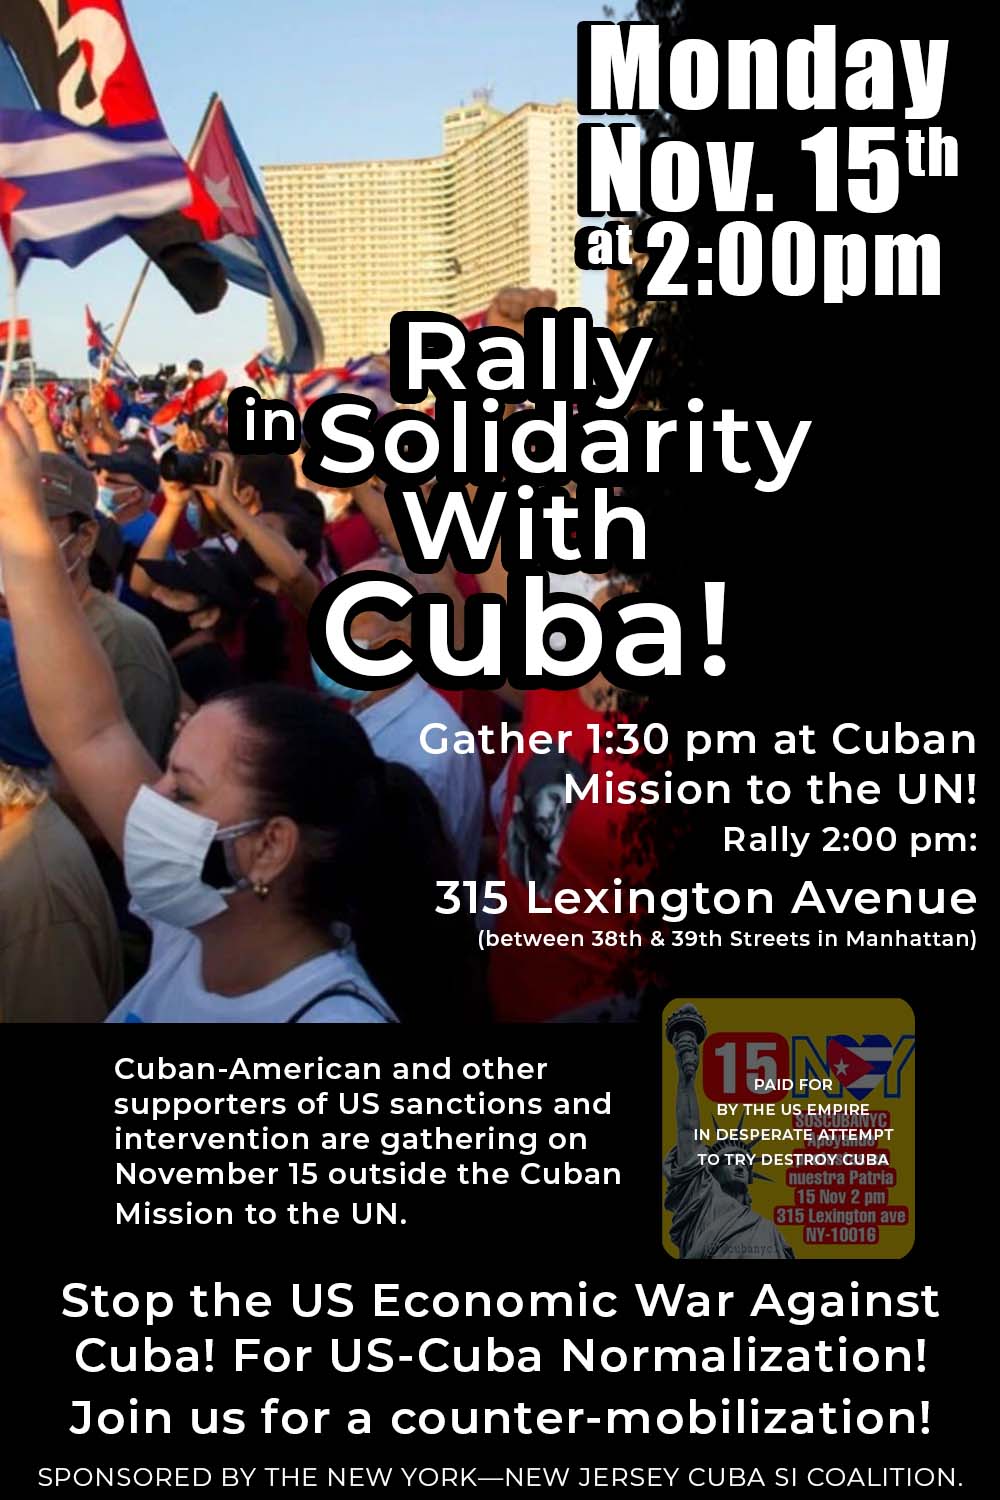 RALLY IN SOLIDARITY WITH CUBA! - MONDAY, NOV.15TH AT 2:00PM